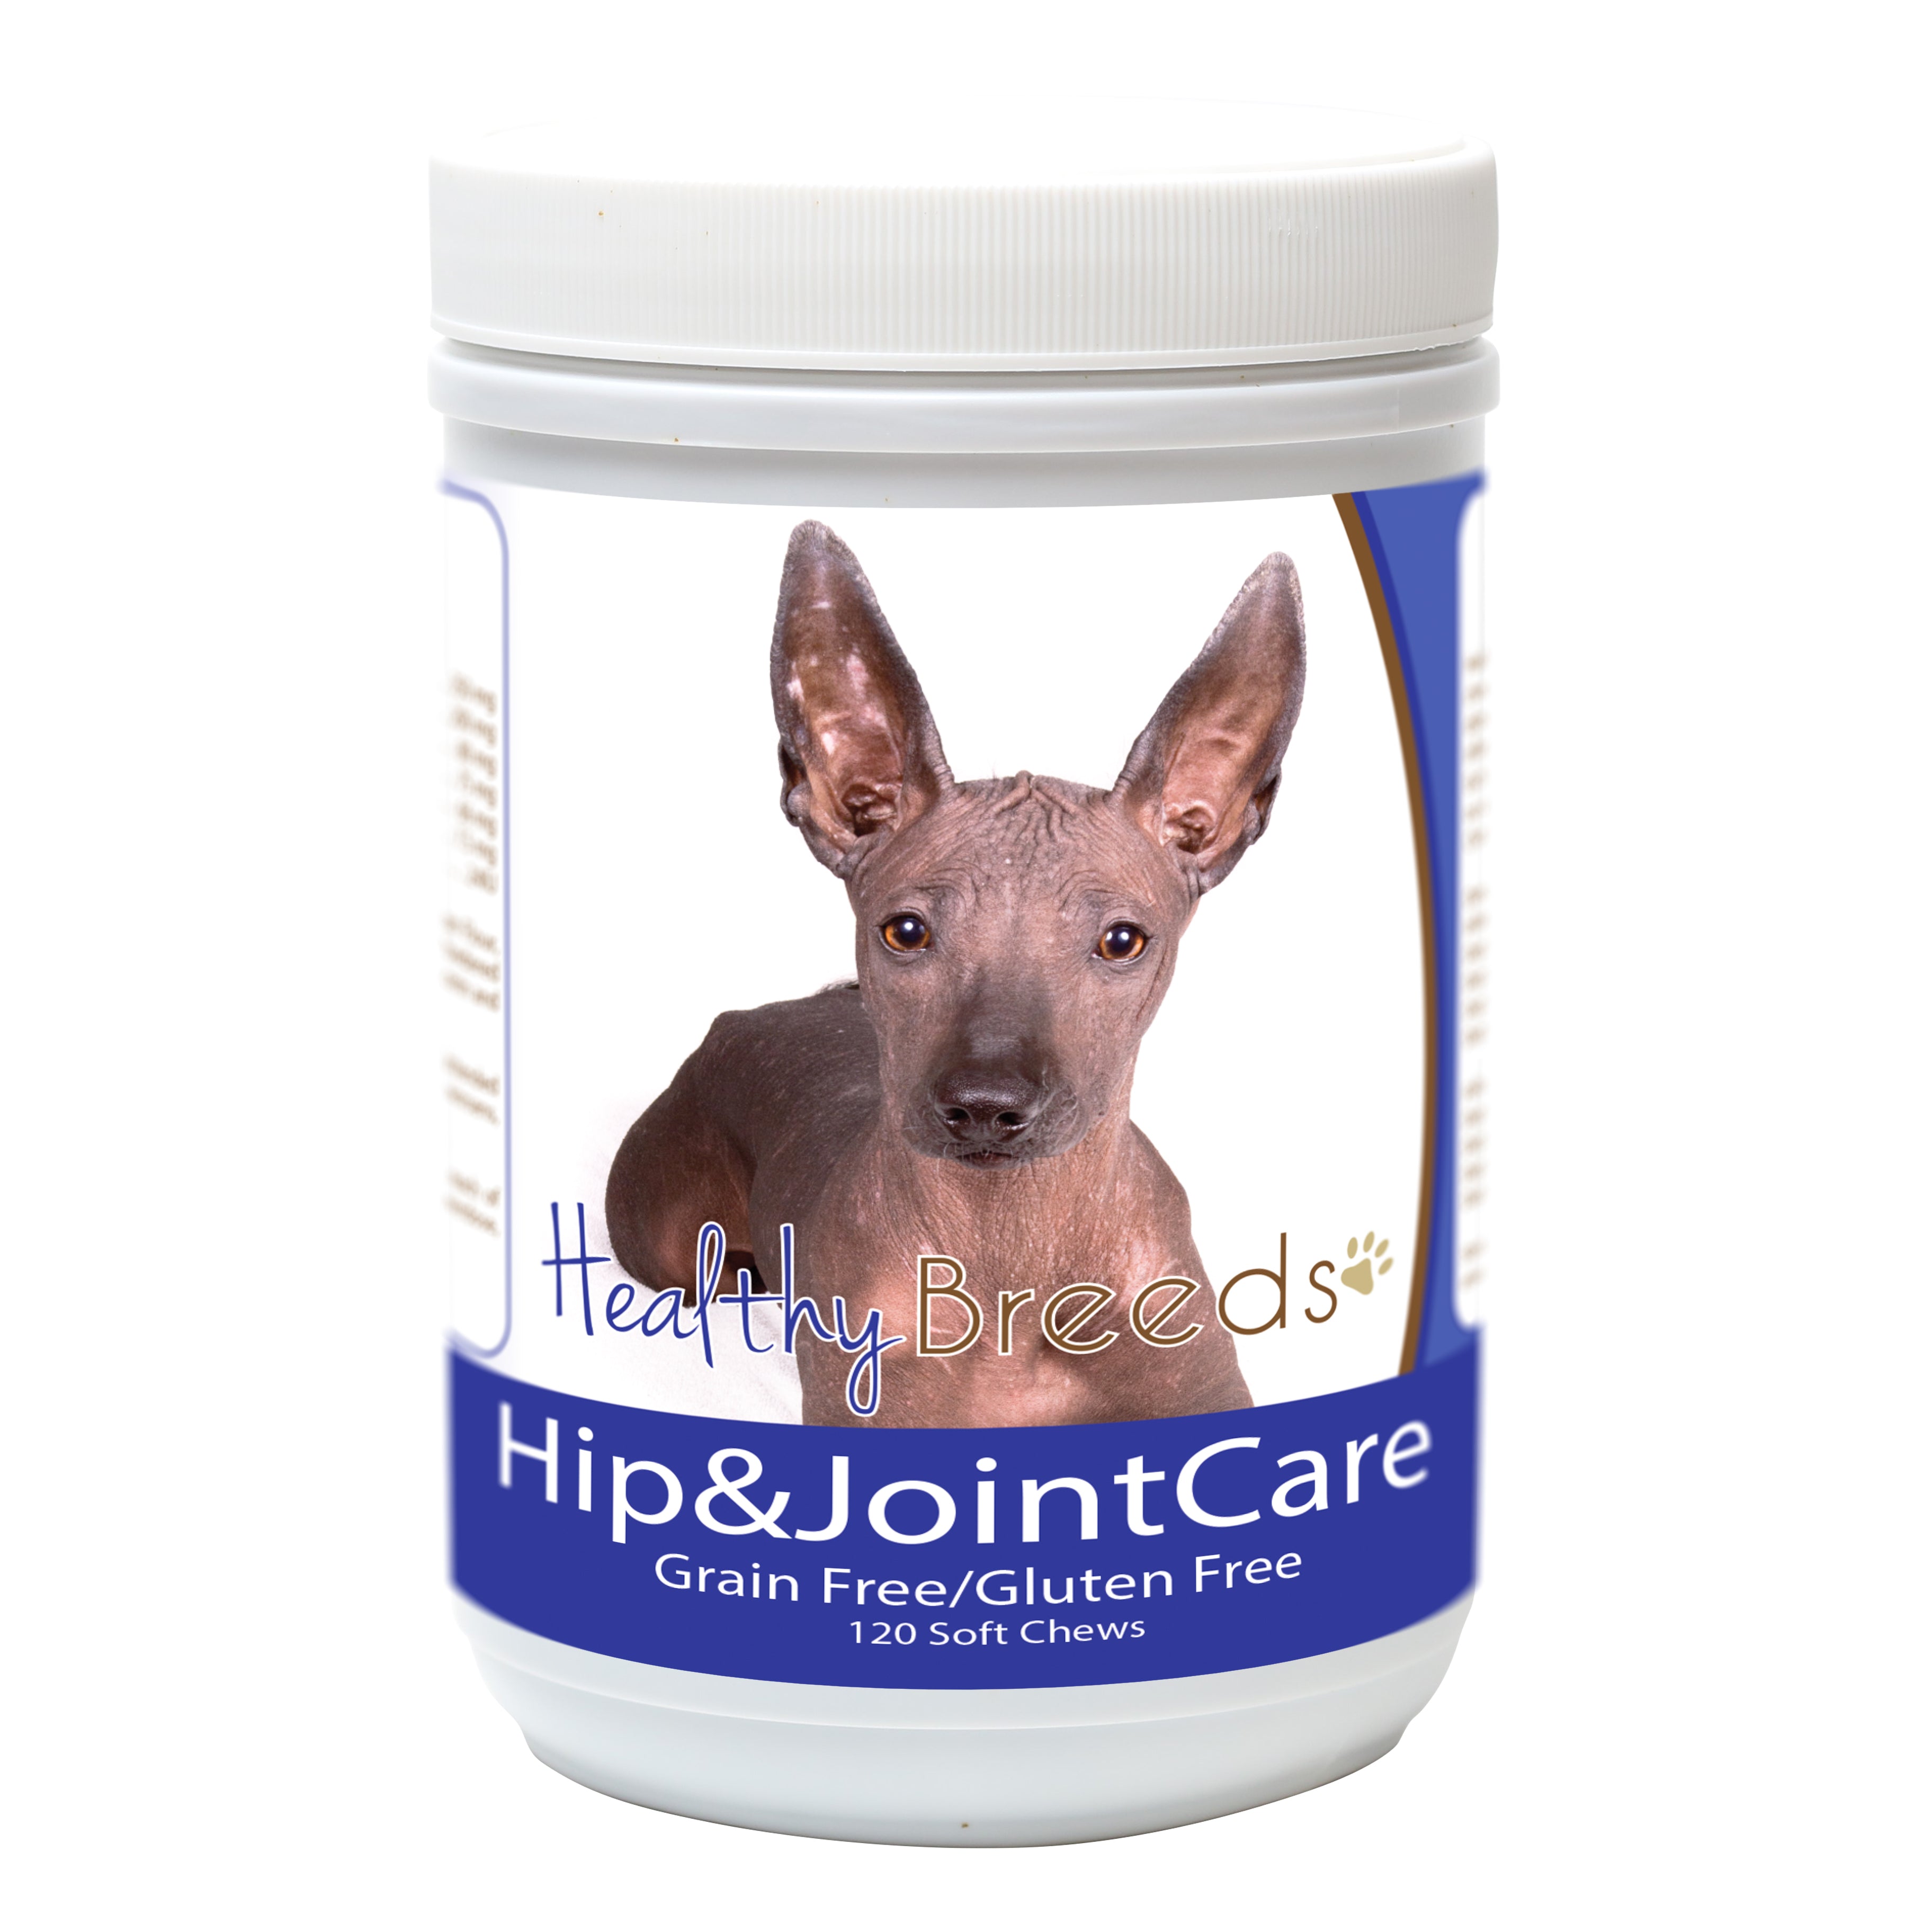 Xoloitzcuintli Hip and Joint Care 120 Count